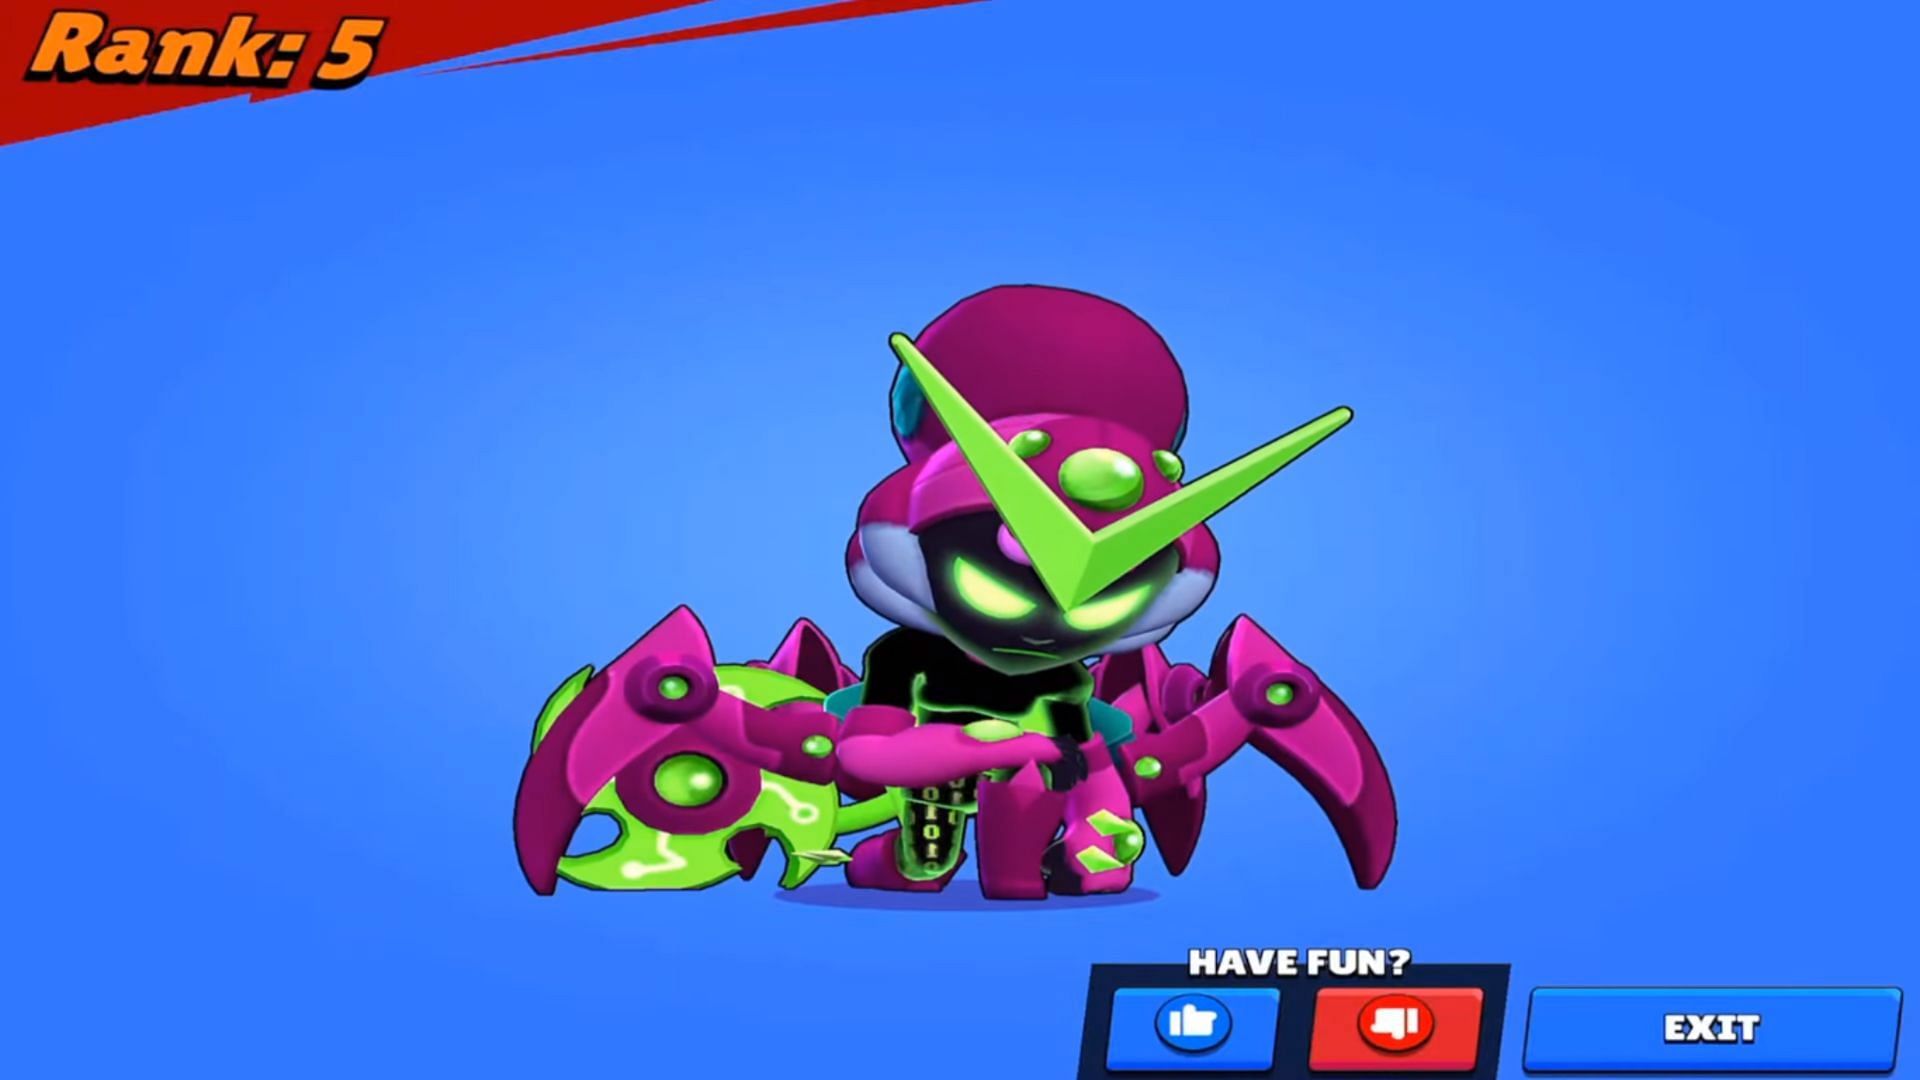 Losing animation (Image via Lik3rs/YouTube || Supercell)